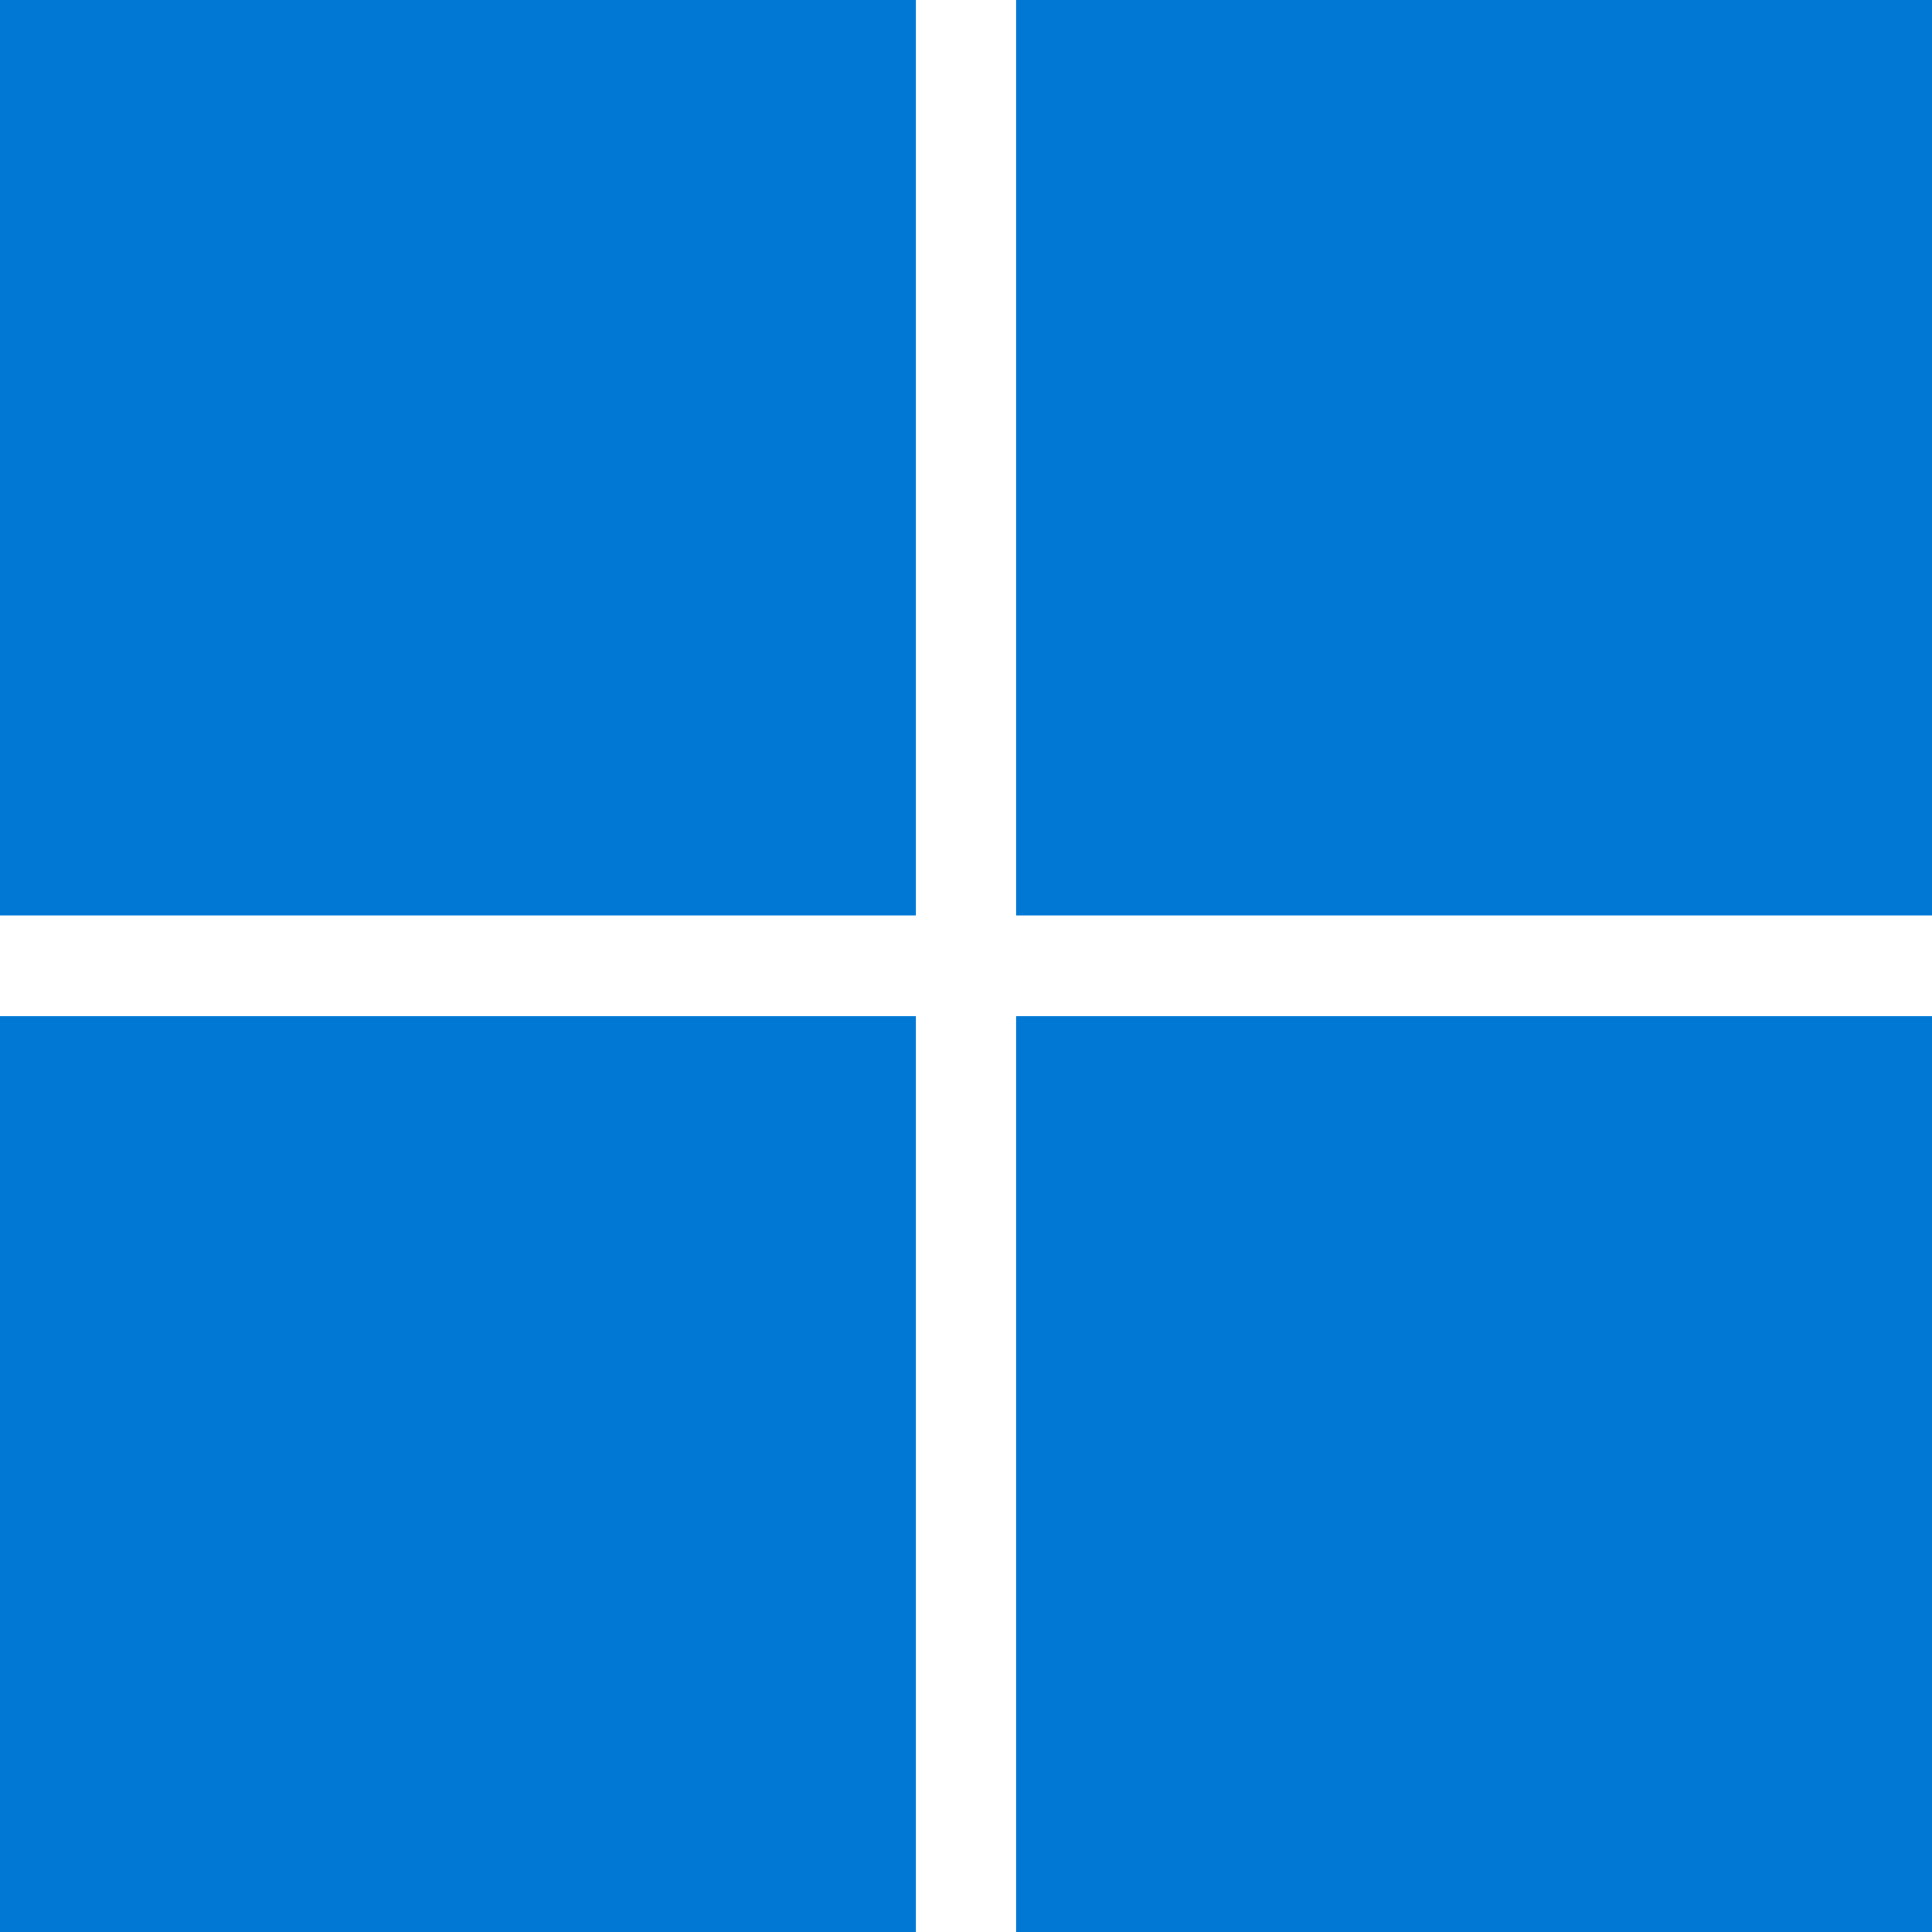 Windows logo or a computer scanning files